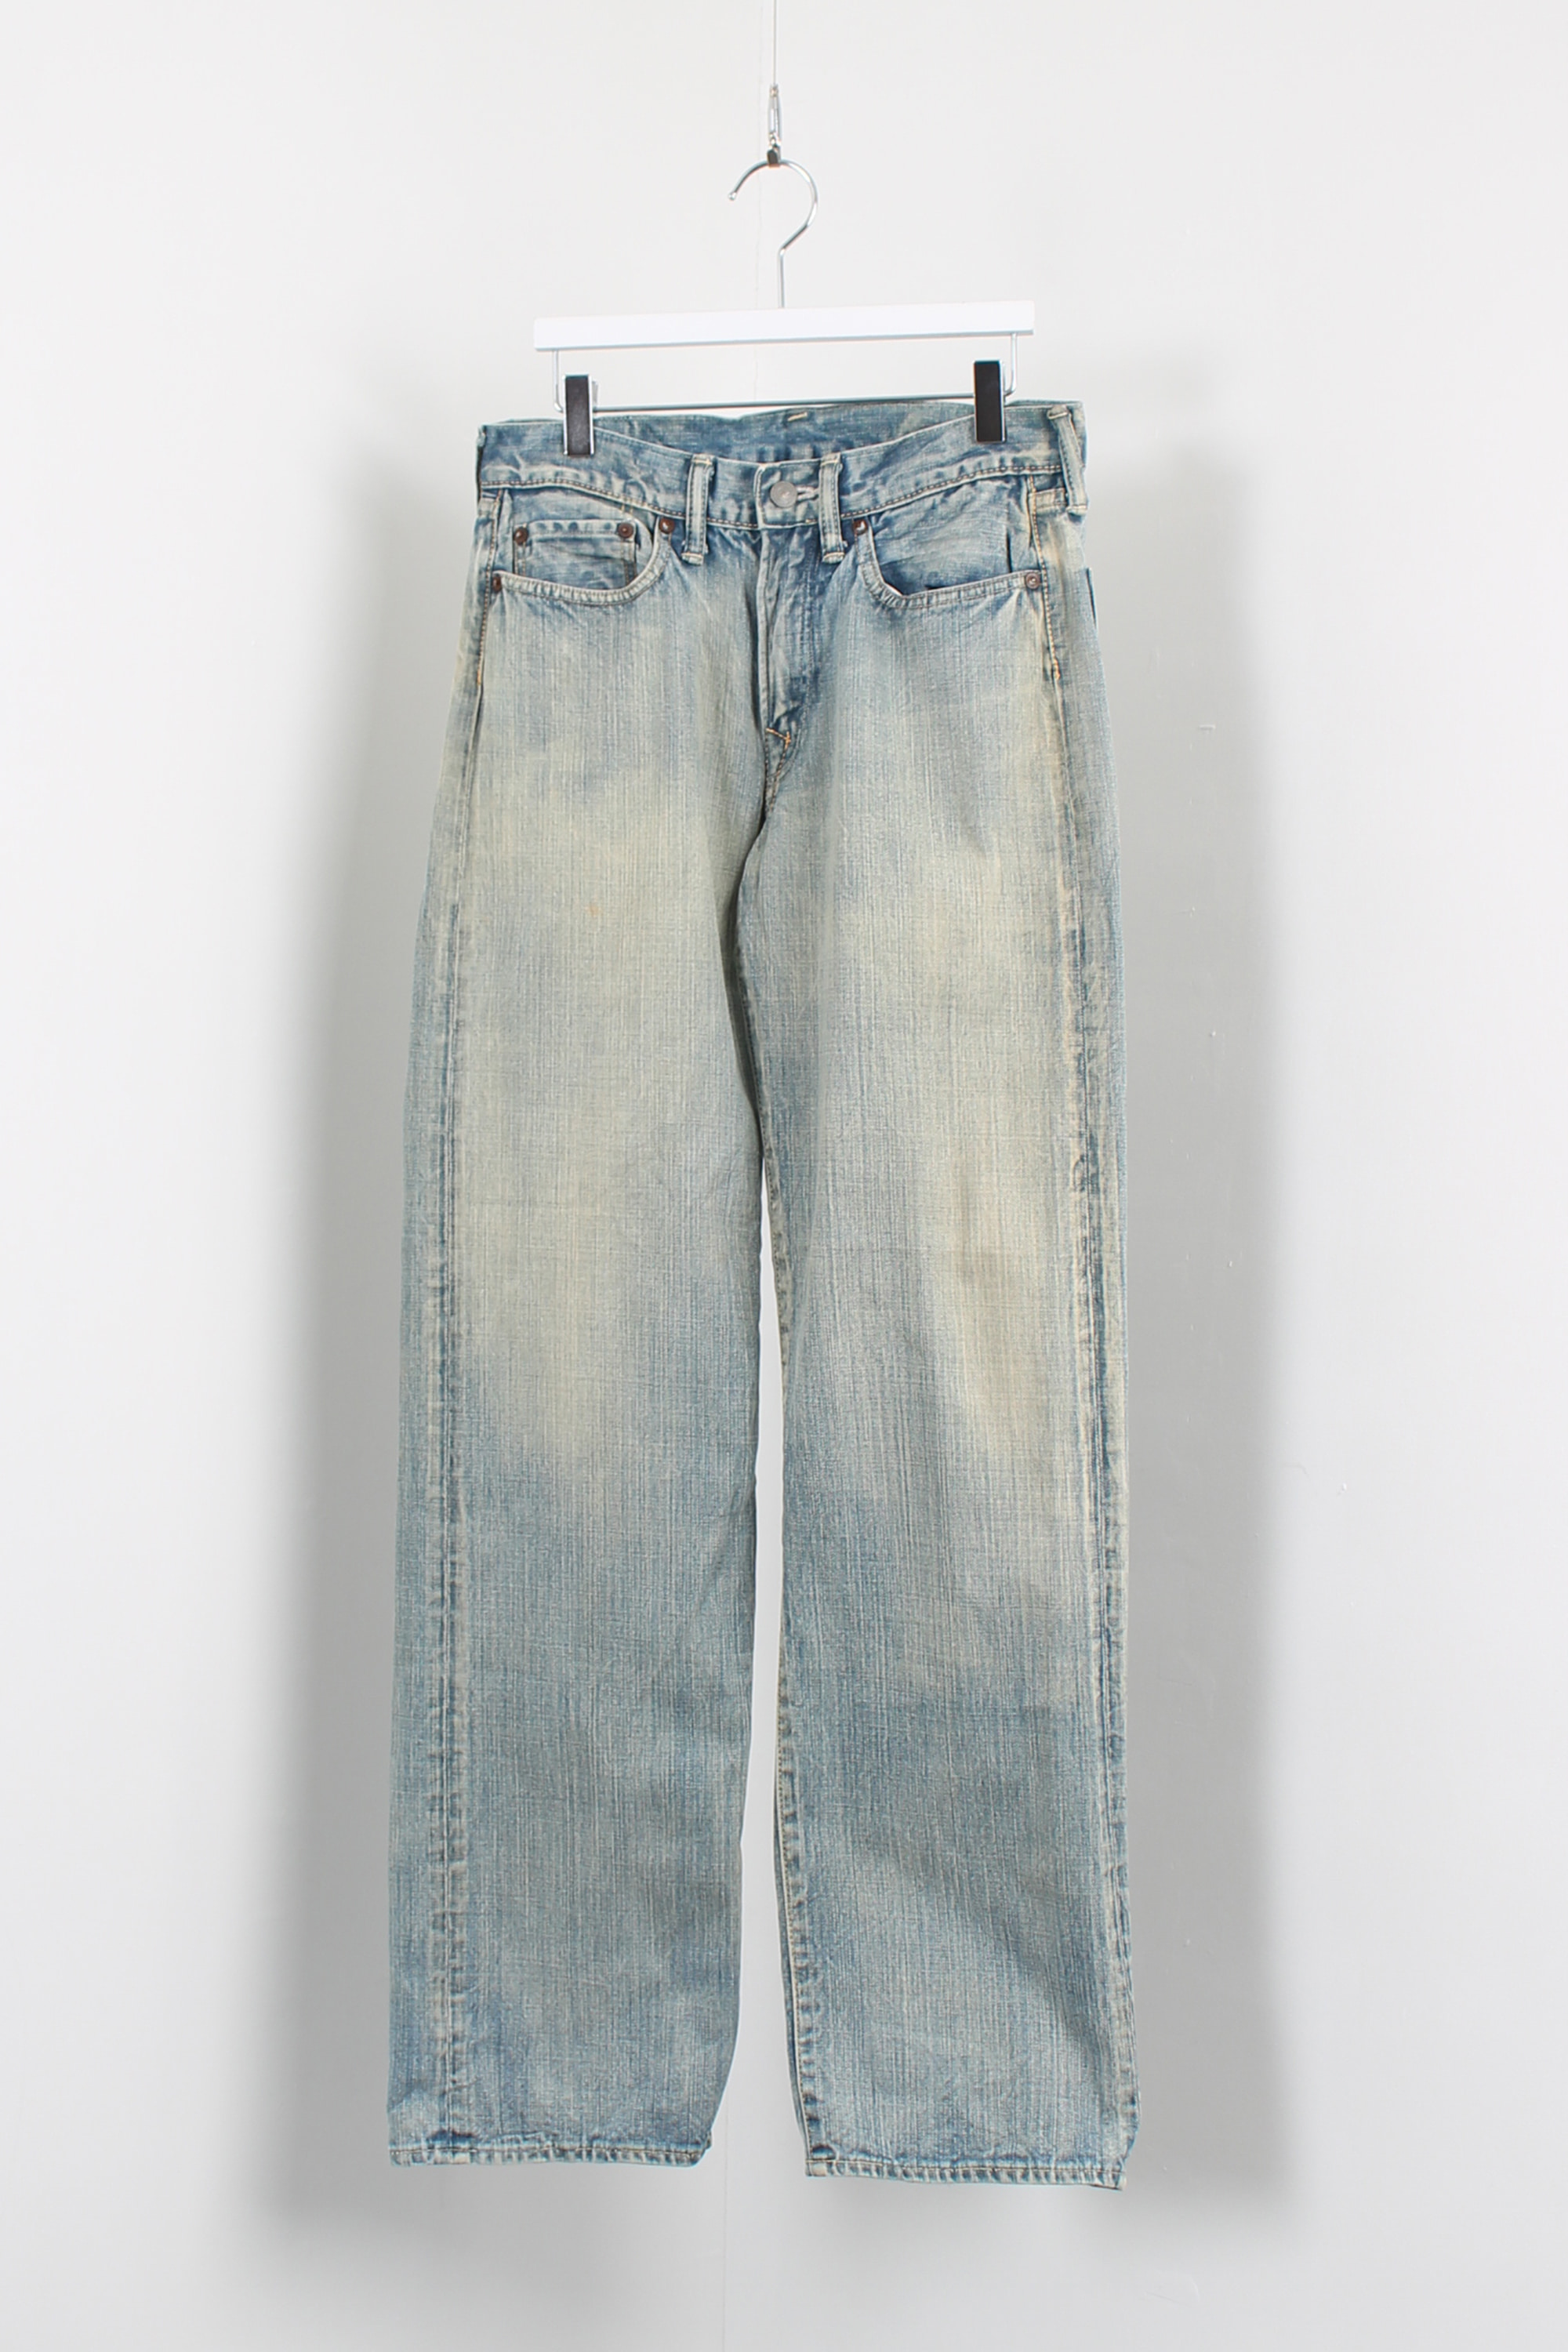 45RPM washed jean